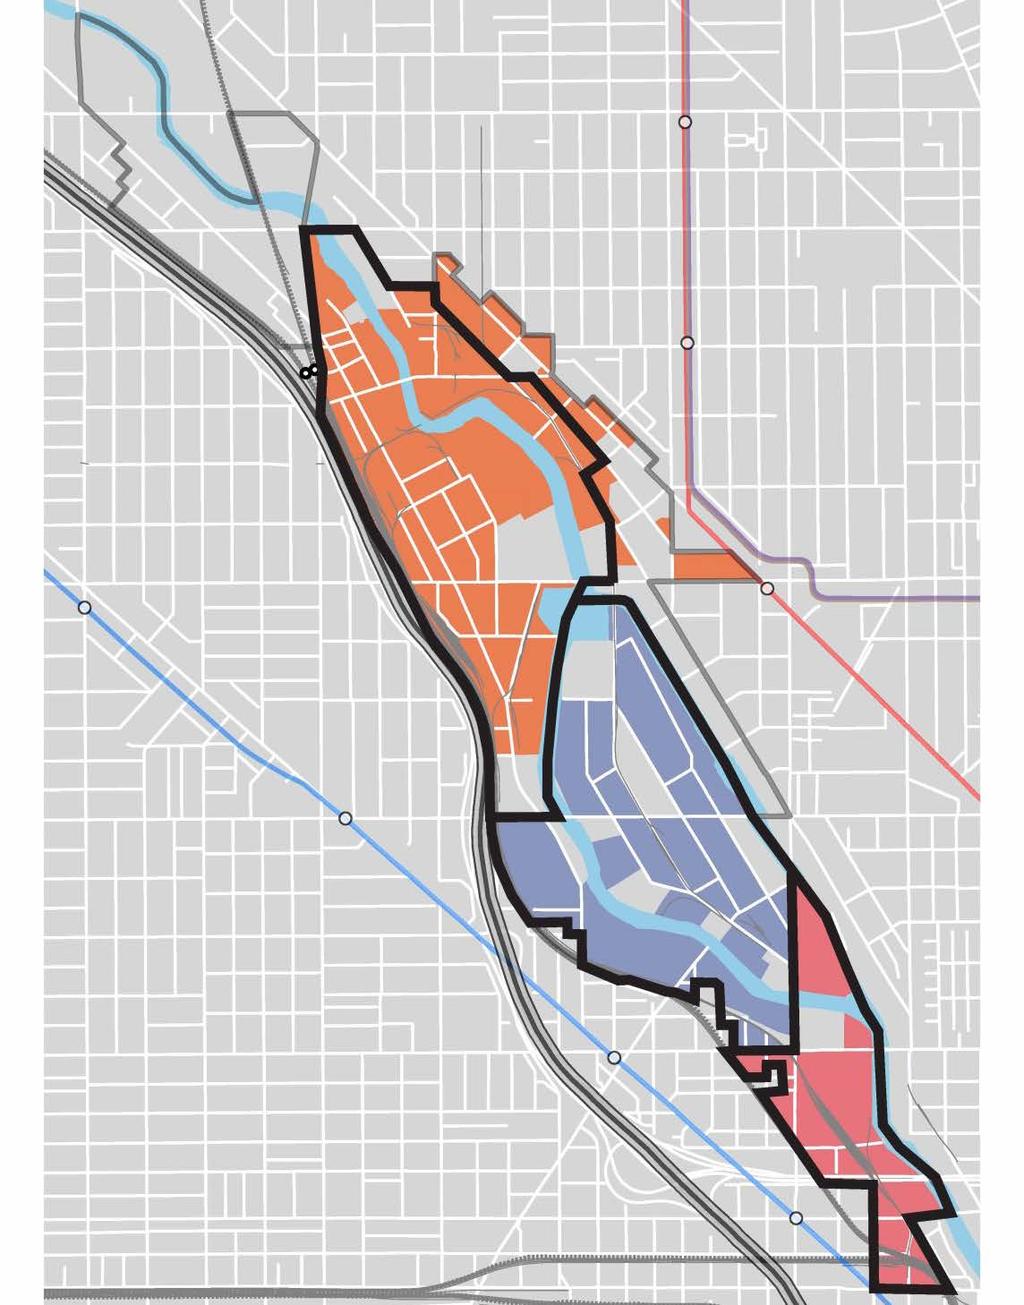 Proposed Zoning Changes Repeal all or portions of existing PMDs in the northern and southern portions of the North Branch Corridor Subdistrict A: Existing PMD repealed to previous Zoning Districts